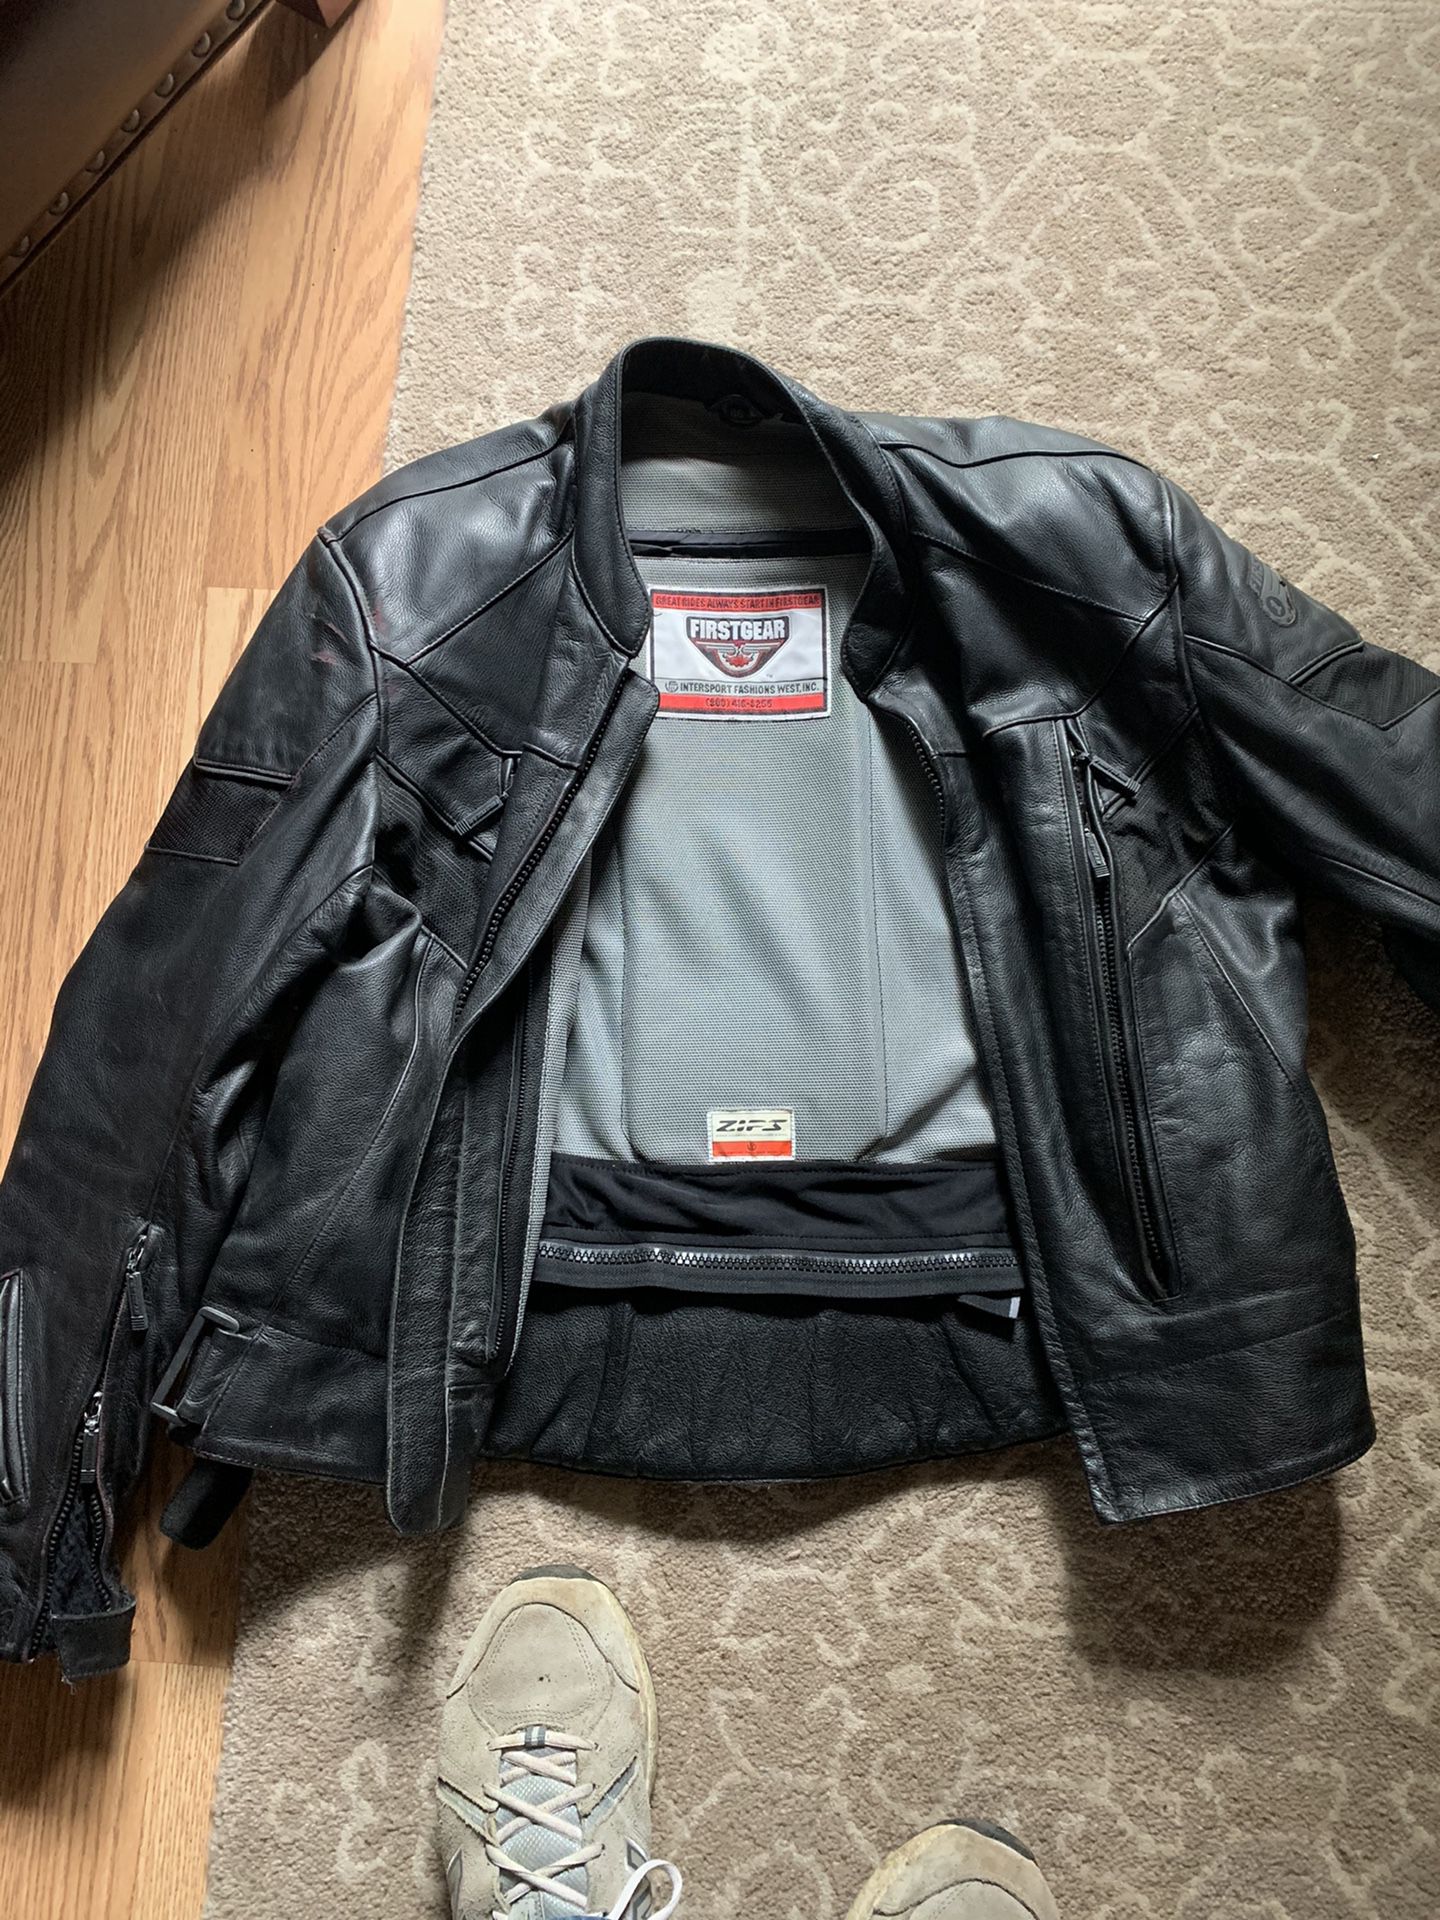 Leather Motorcycle Jacket And 2 Helmets 